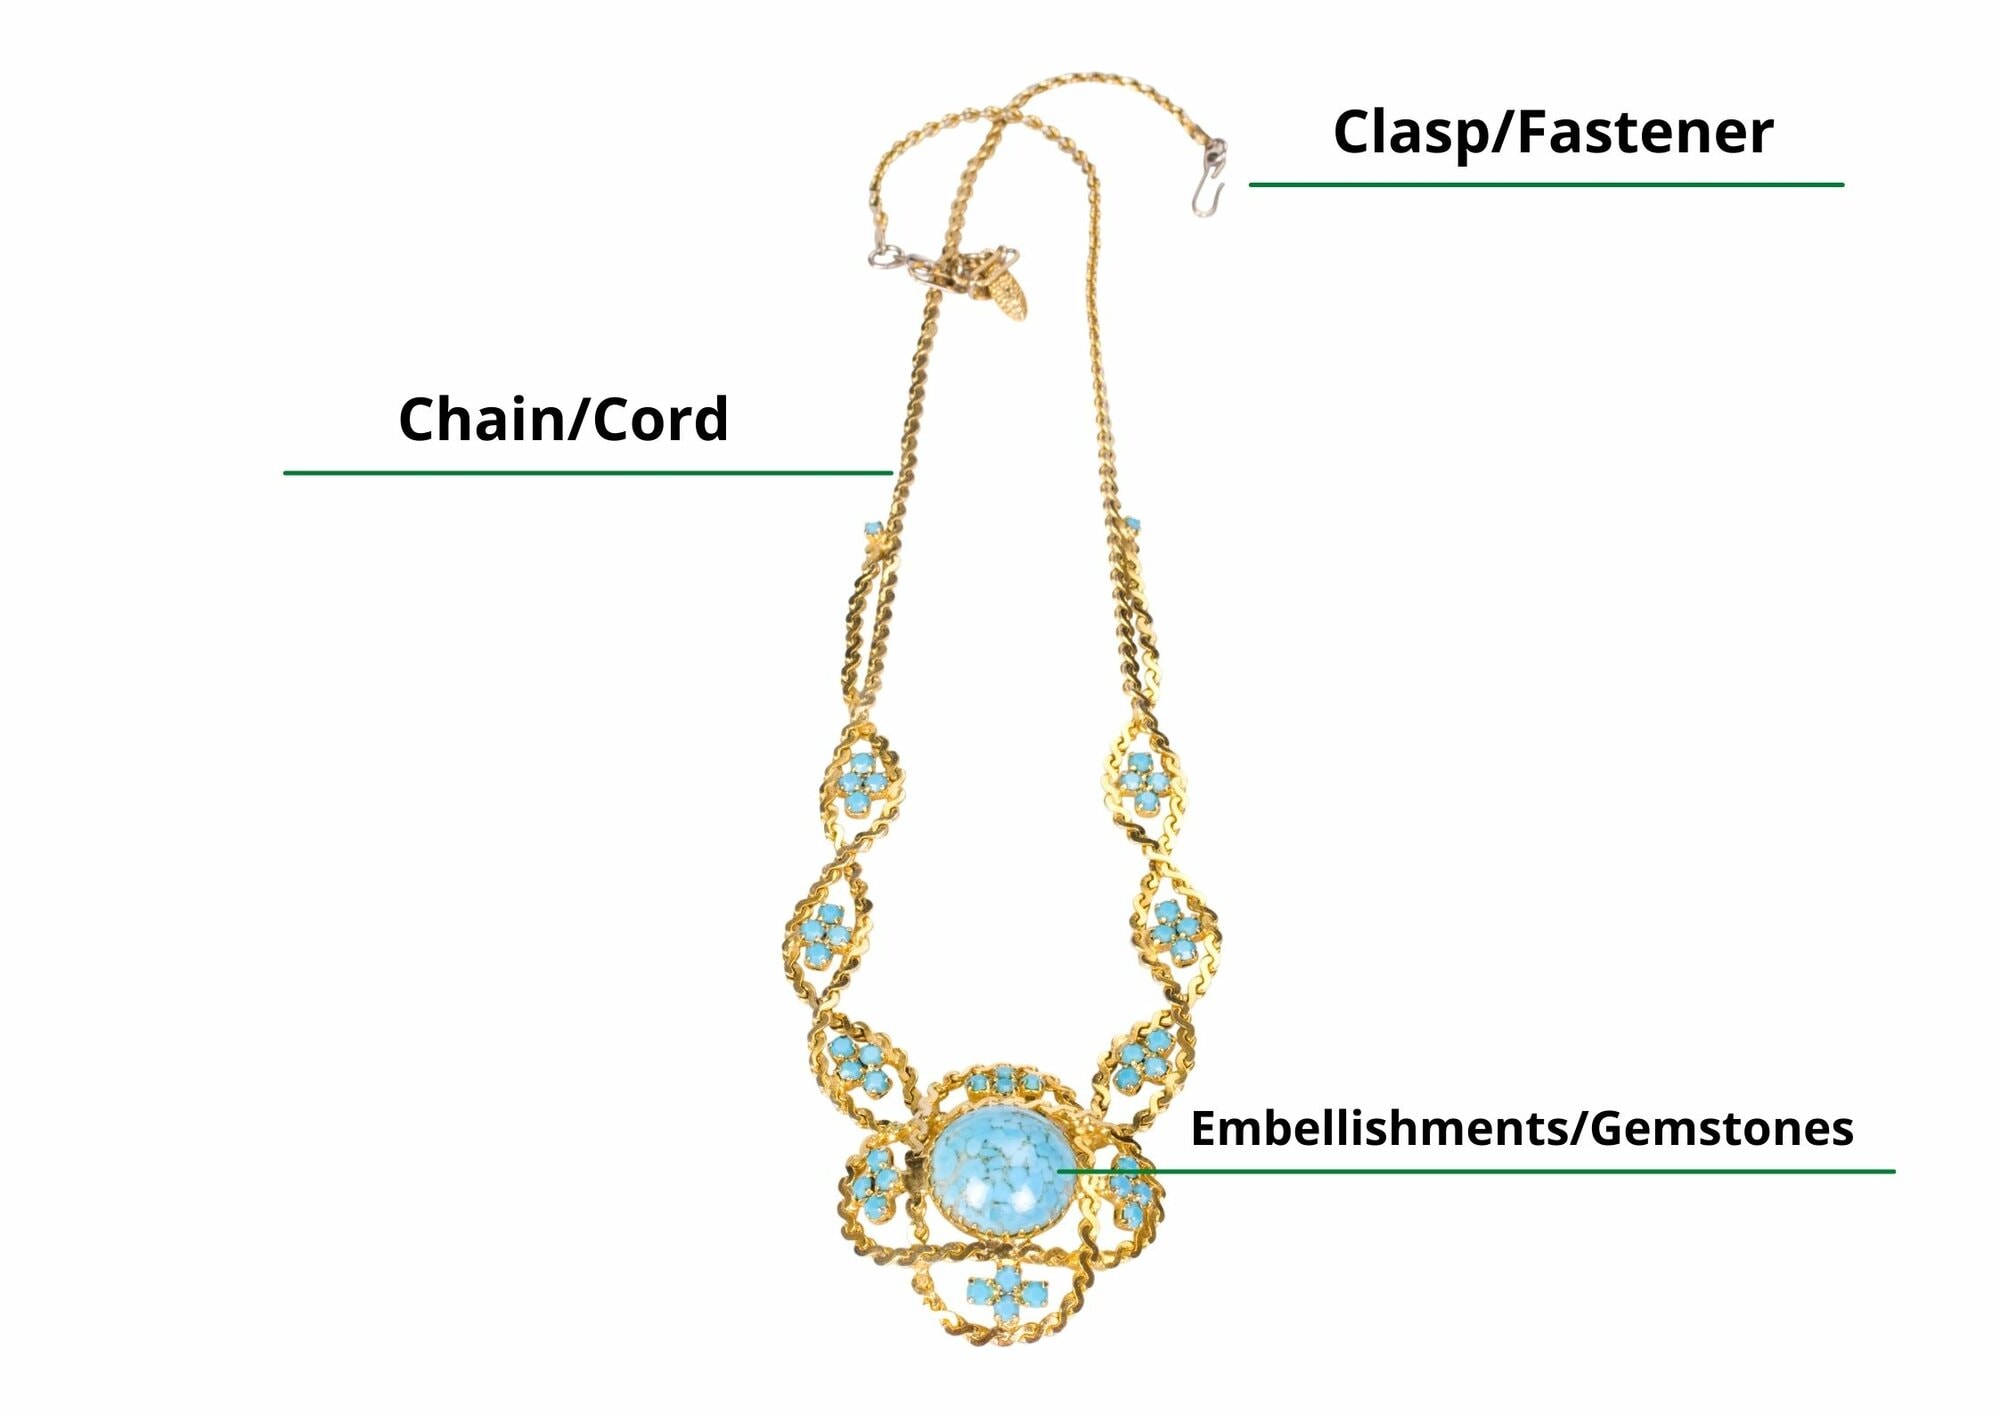 Parts of a necklace